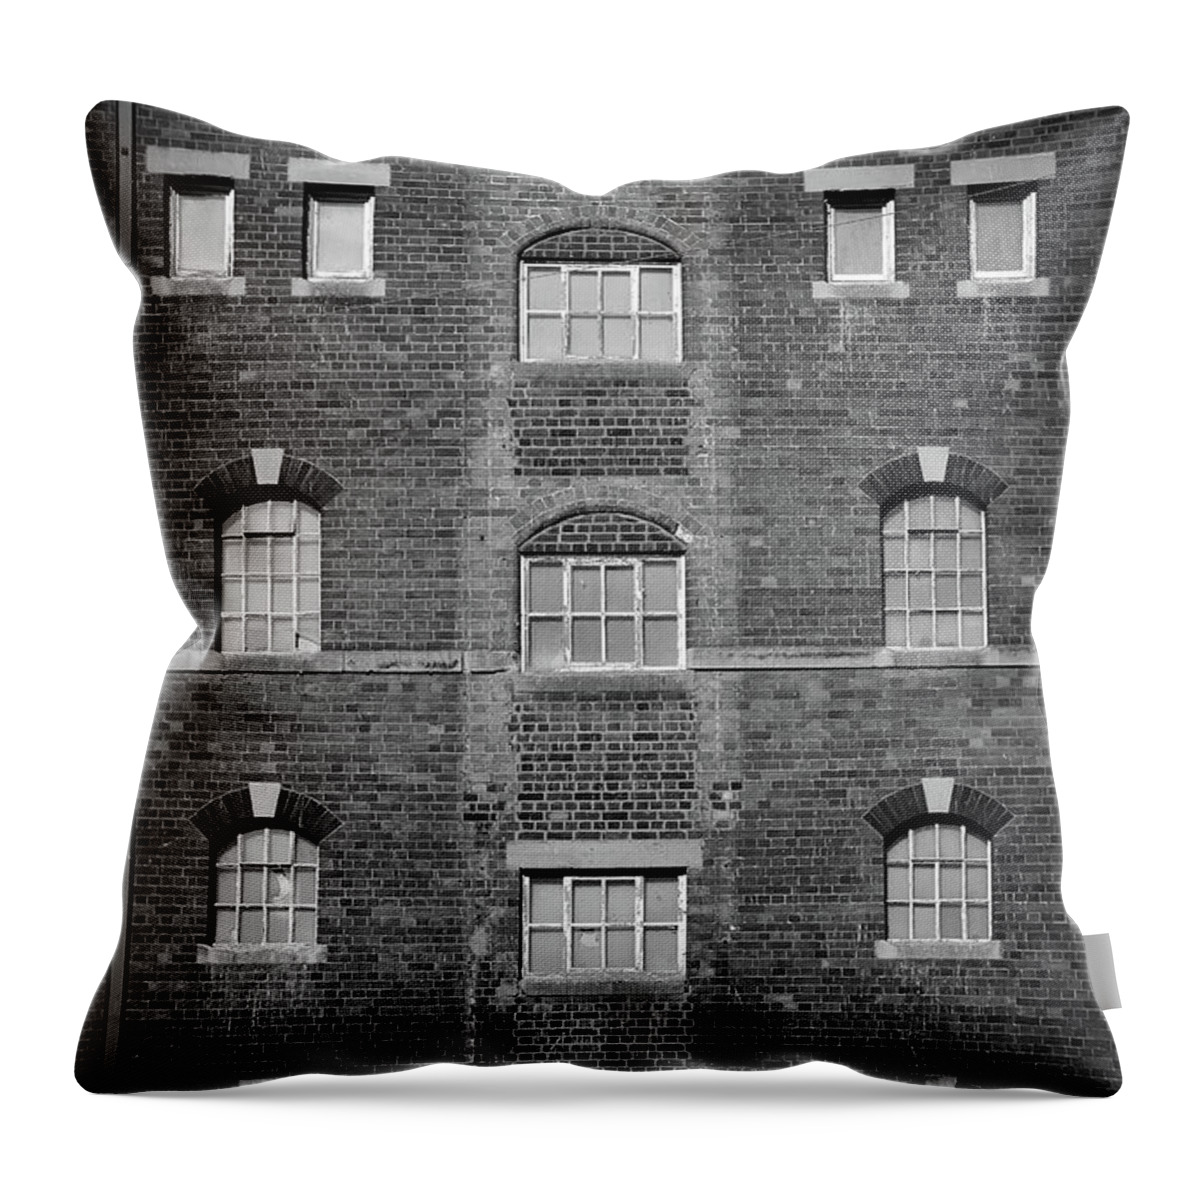 Background Throw Pillow featuring the photograph Symmetrical Industrial building windows by Seeables Visual Arts